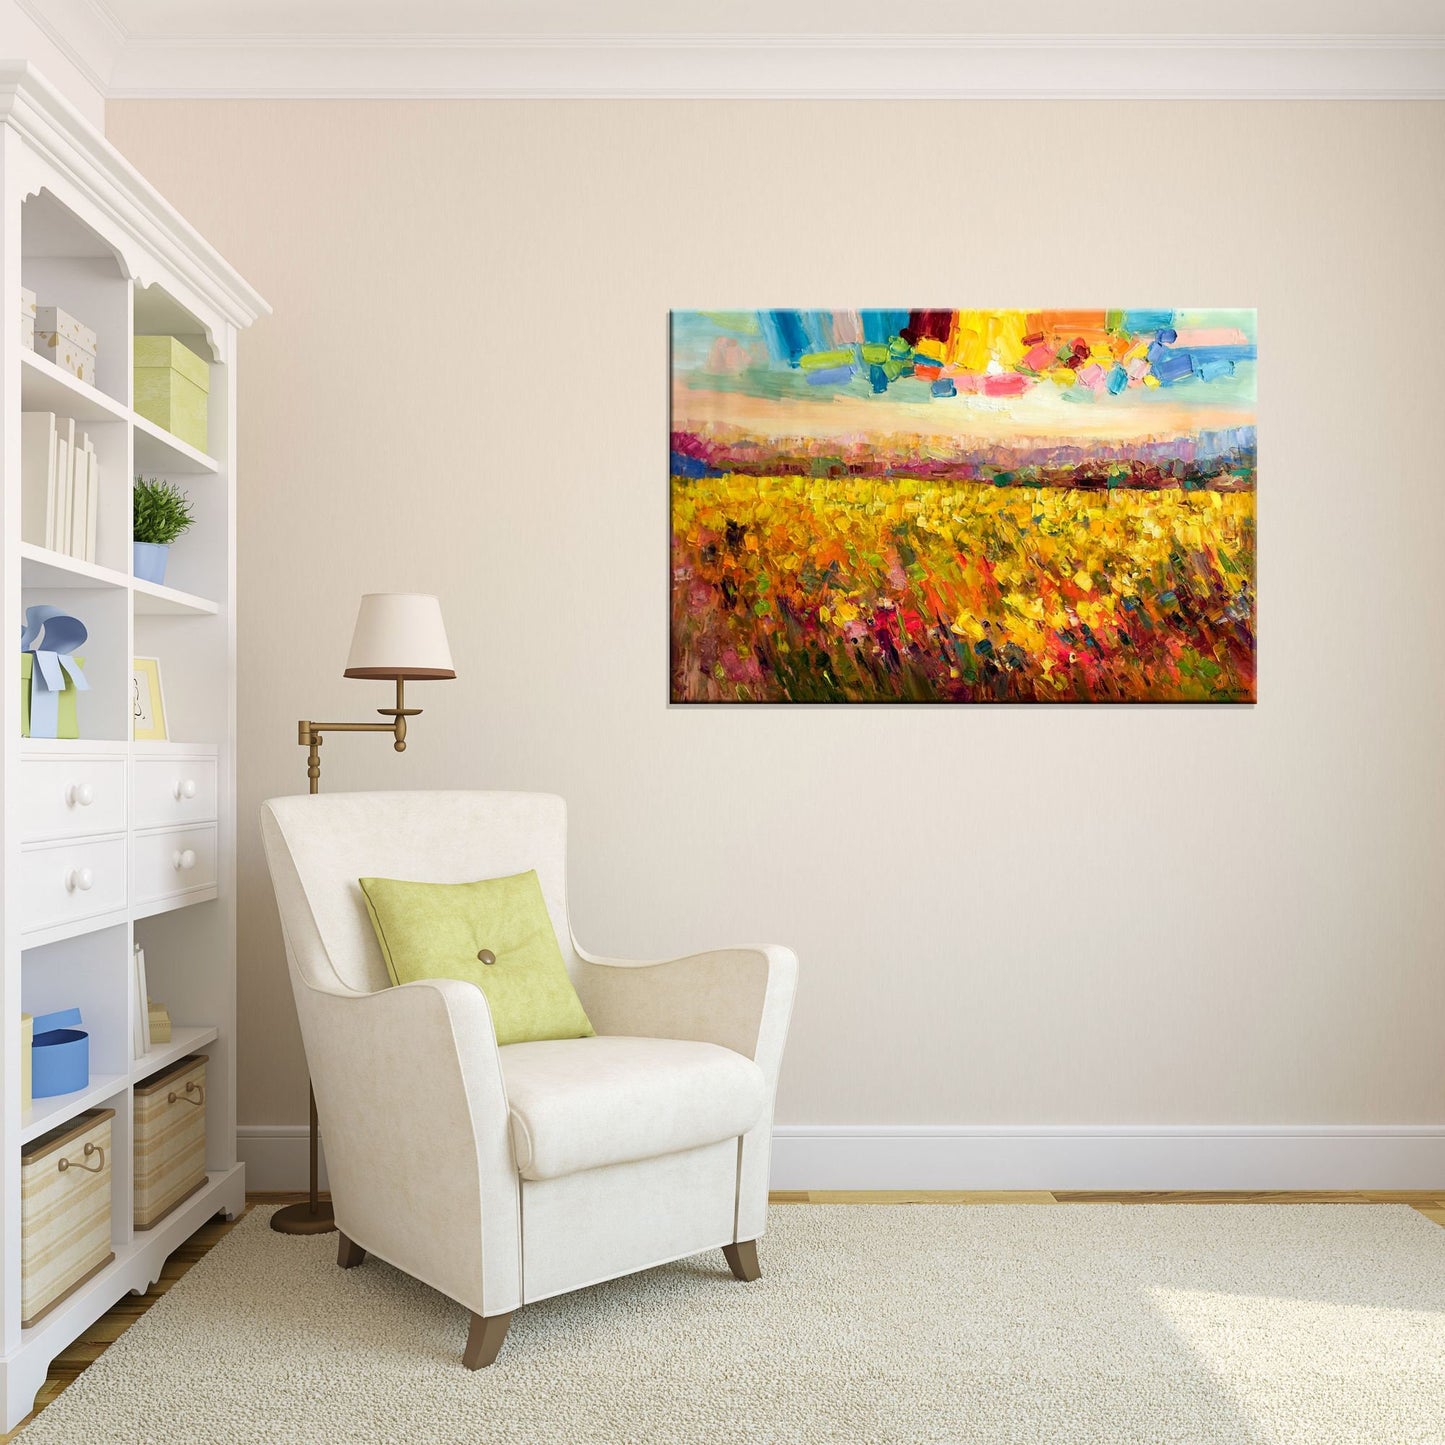 Abstract Landscape Painting Autumn Fields, Canvas Art, Oil Painting, Landscape Painting, Oversized Wall Art, Contemporary, Textured Painting